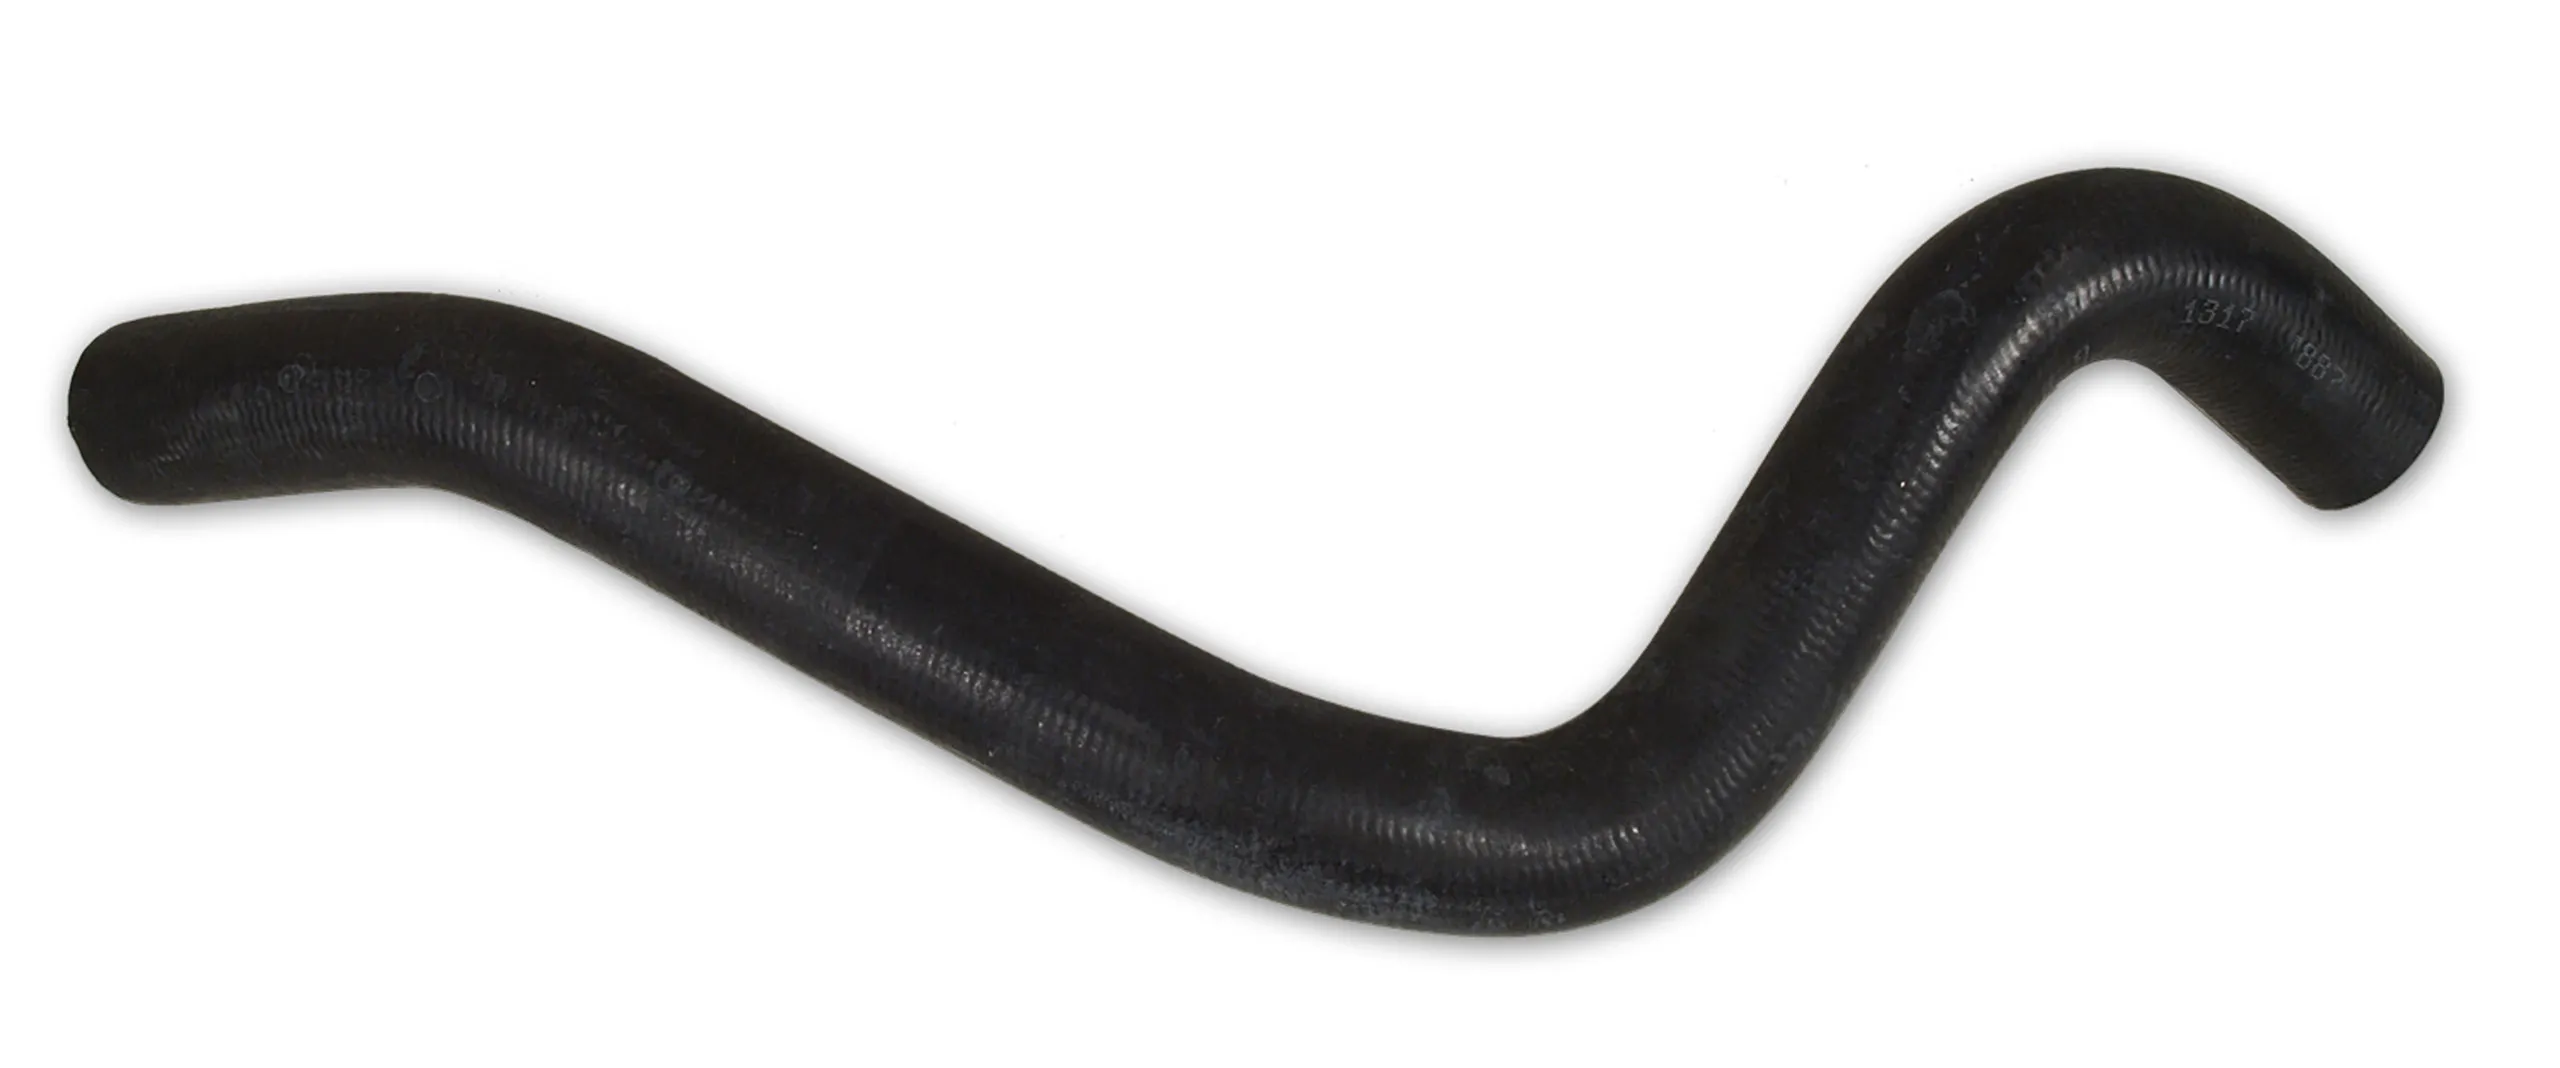 C3 1976-1979 Chevrolet Corvette Radiator Hose - Upper - 1976 Late 1979 Early - Replacement - Gates